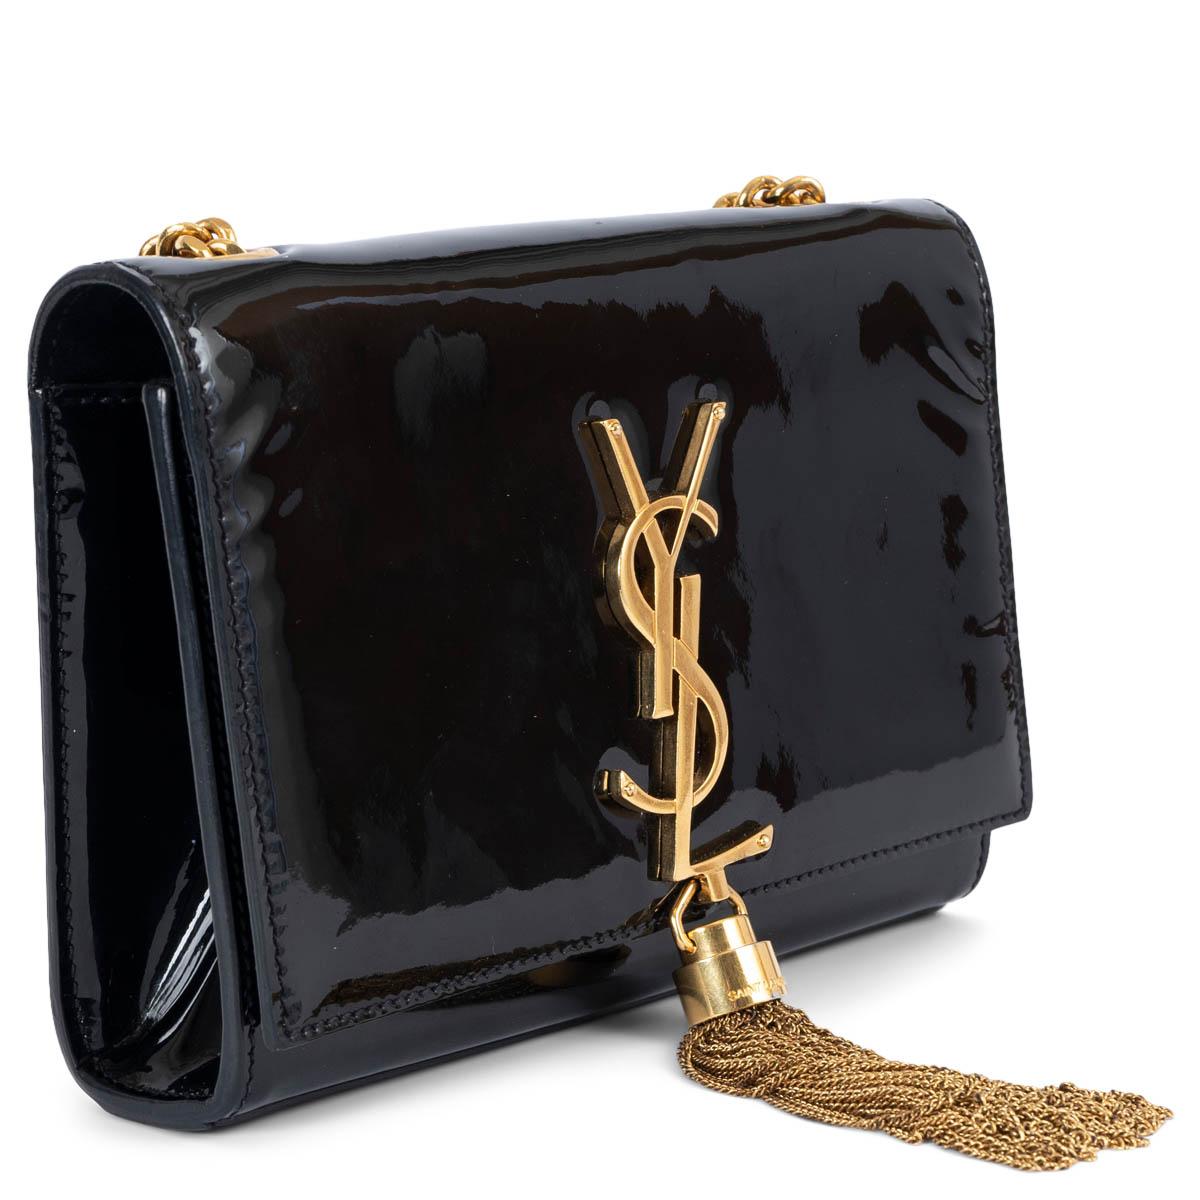 100% authentic Saint Laurent Small Kate shoulder bag in black patent leather embellished with gold-tone YSL logo, tassel and chain-link shoulder strap. Opens with a magnetic button and is lined in black suede with one card slit pocket against the